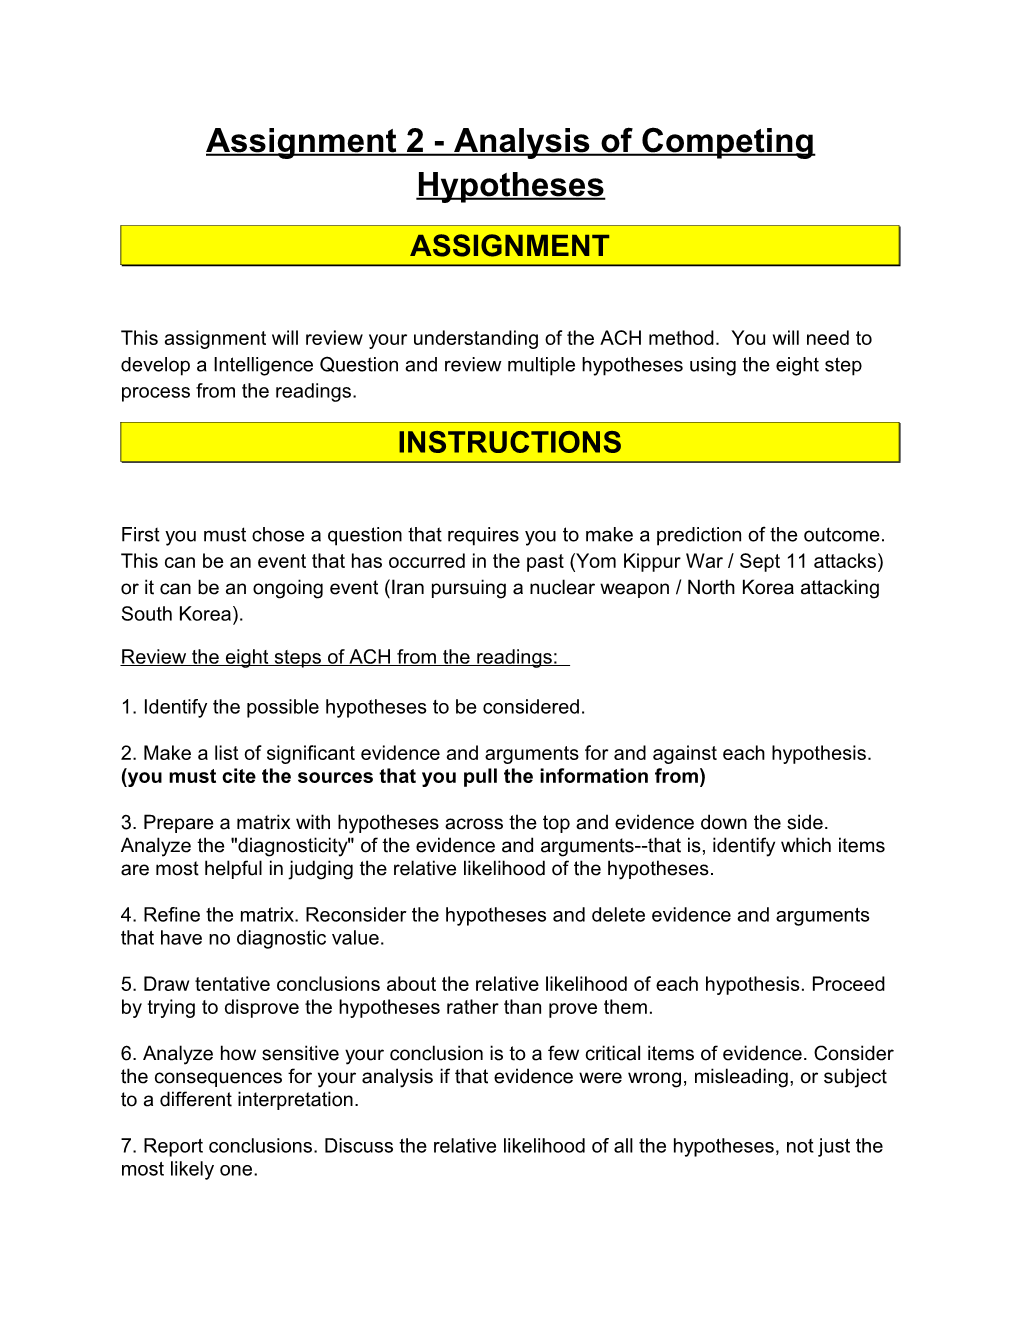 Assignment 2 - Analysis of Competing Hypotheses